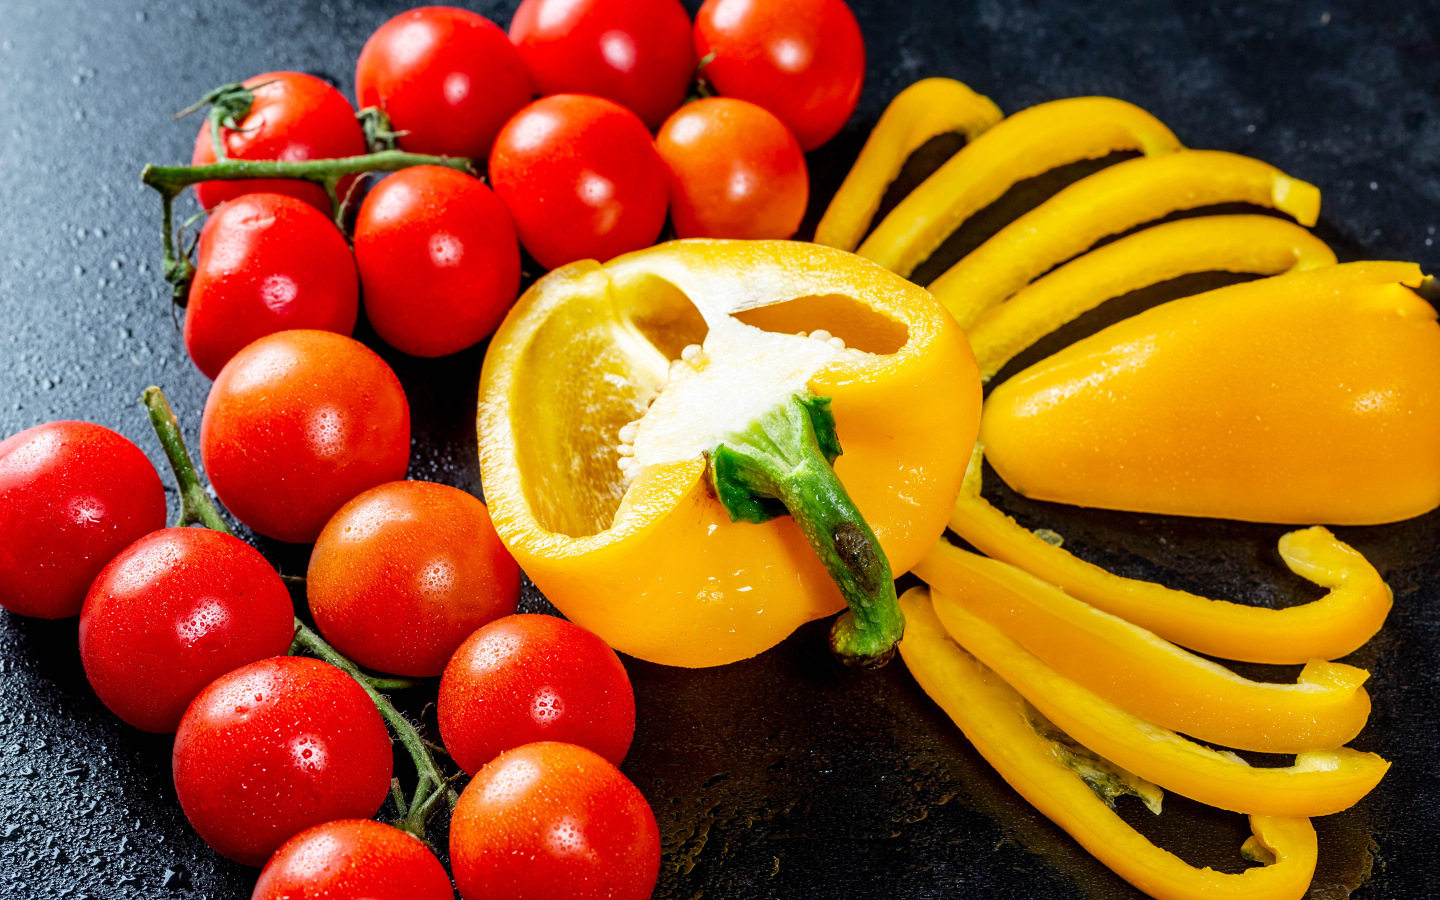 Yellow bell pepper on a table with red tomatoes